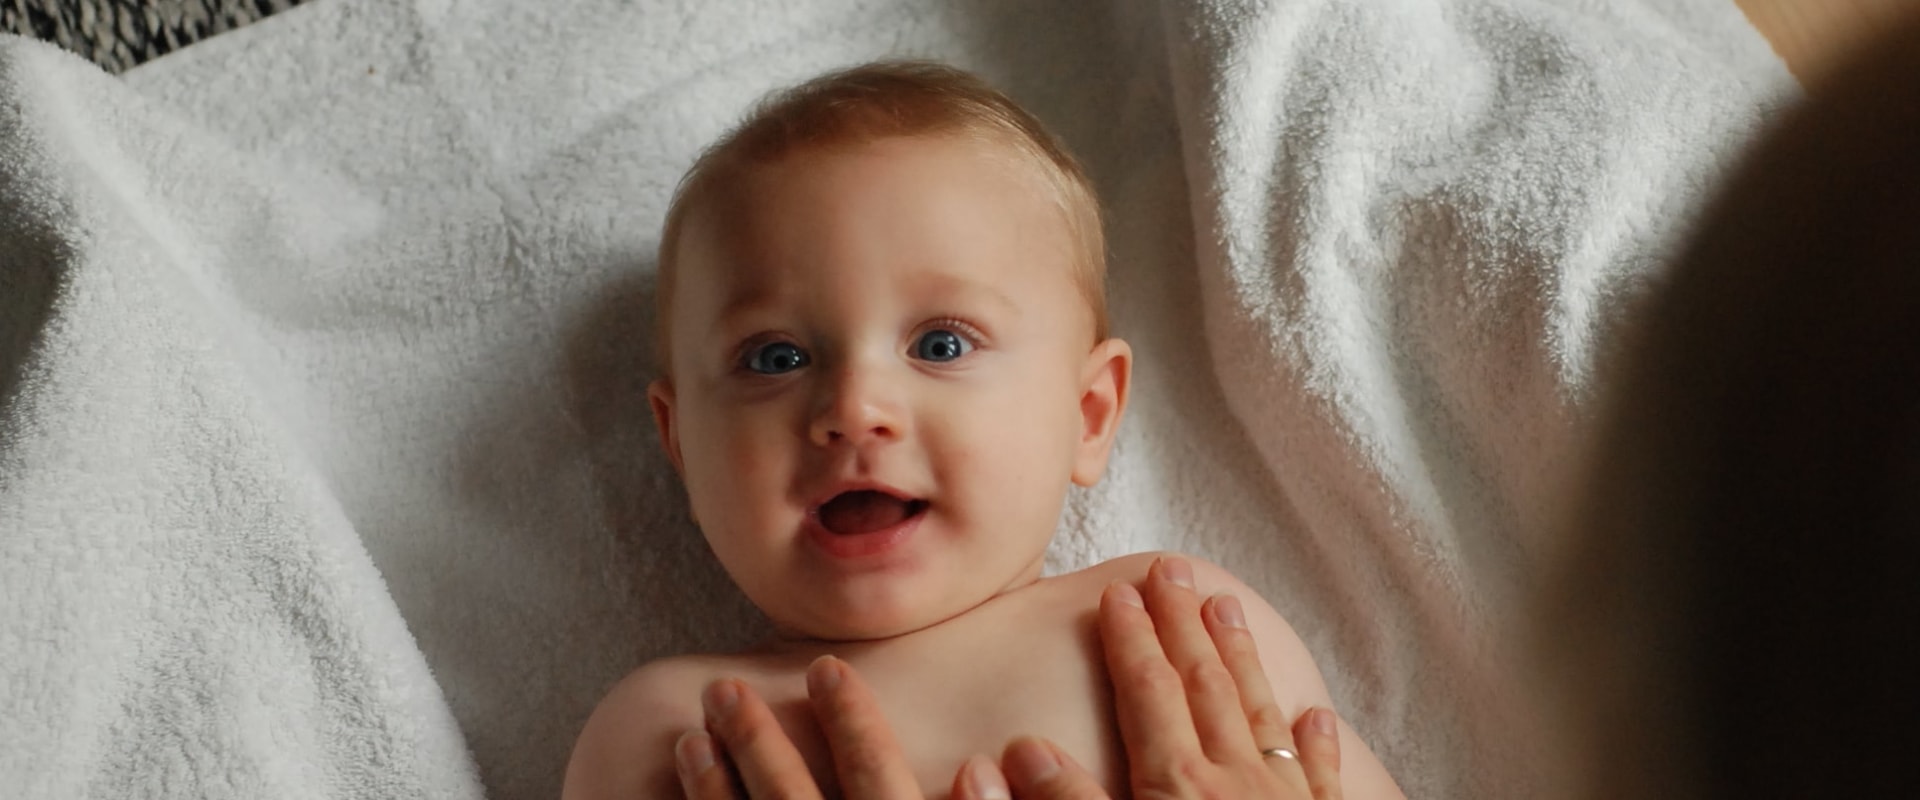 When is the Best Time to Start Baby Massage Classes?